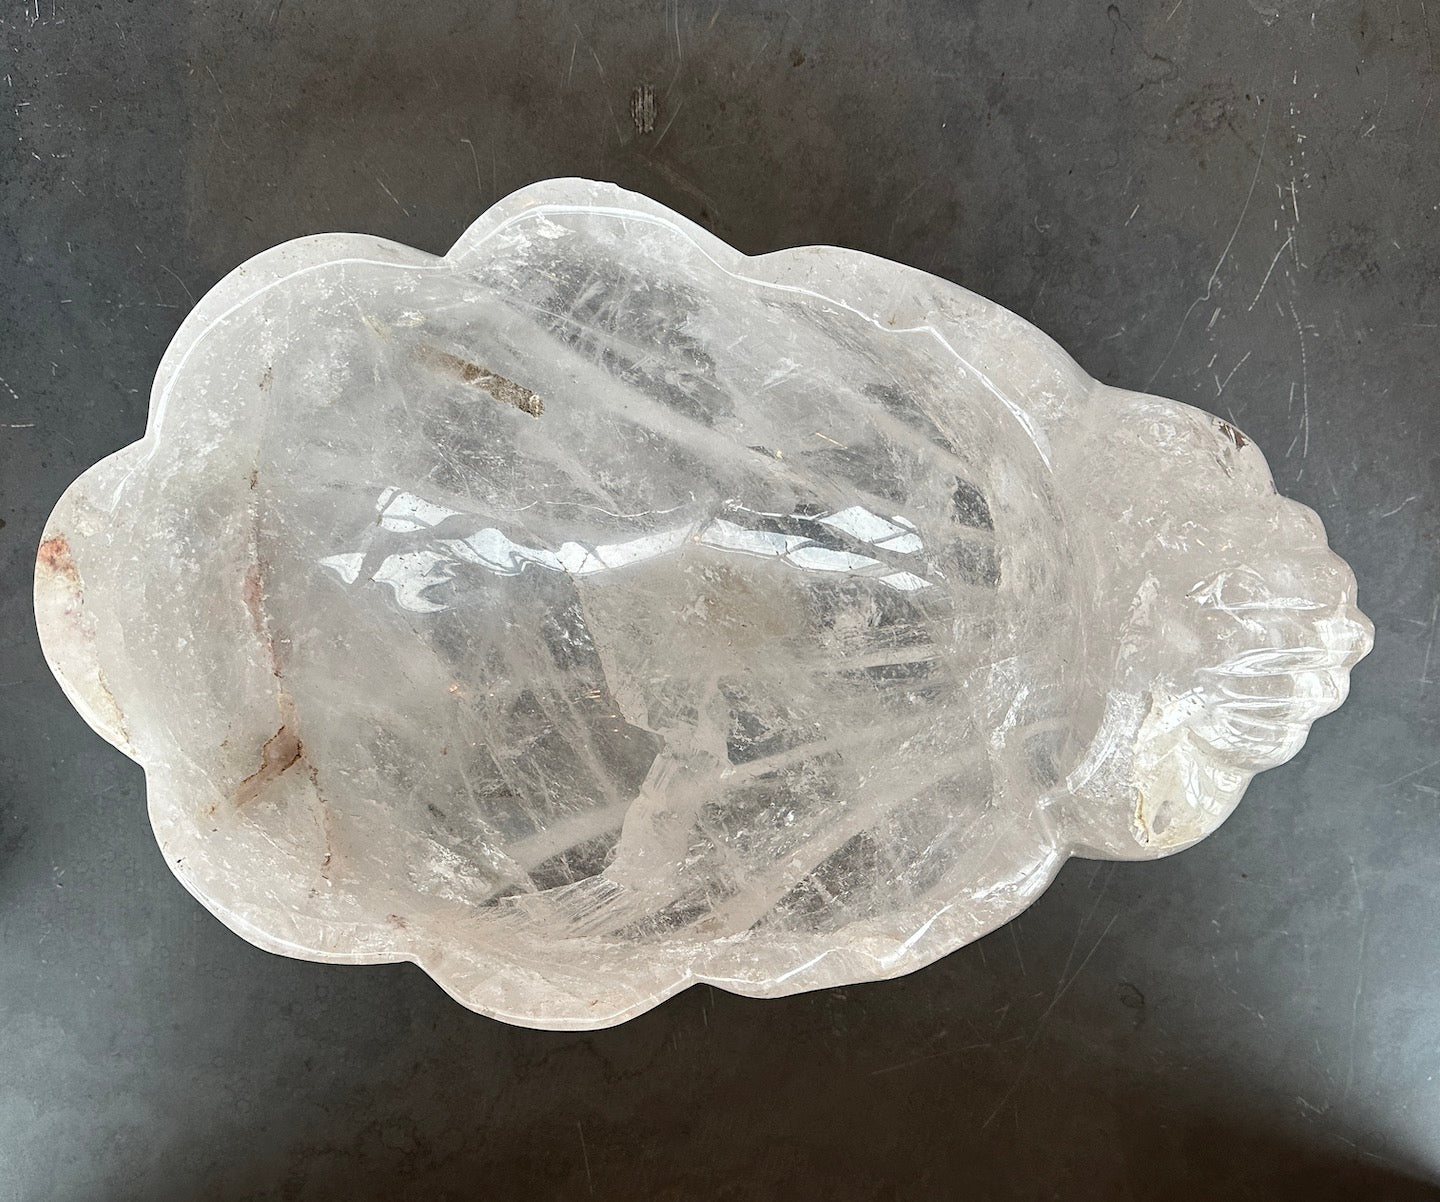 Rock Crystal Shell Shaped Centerpiece Bowl